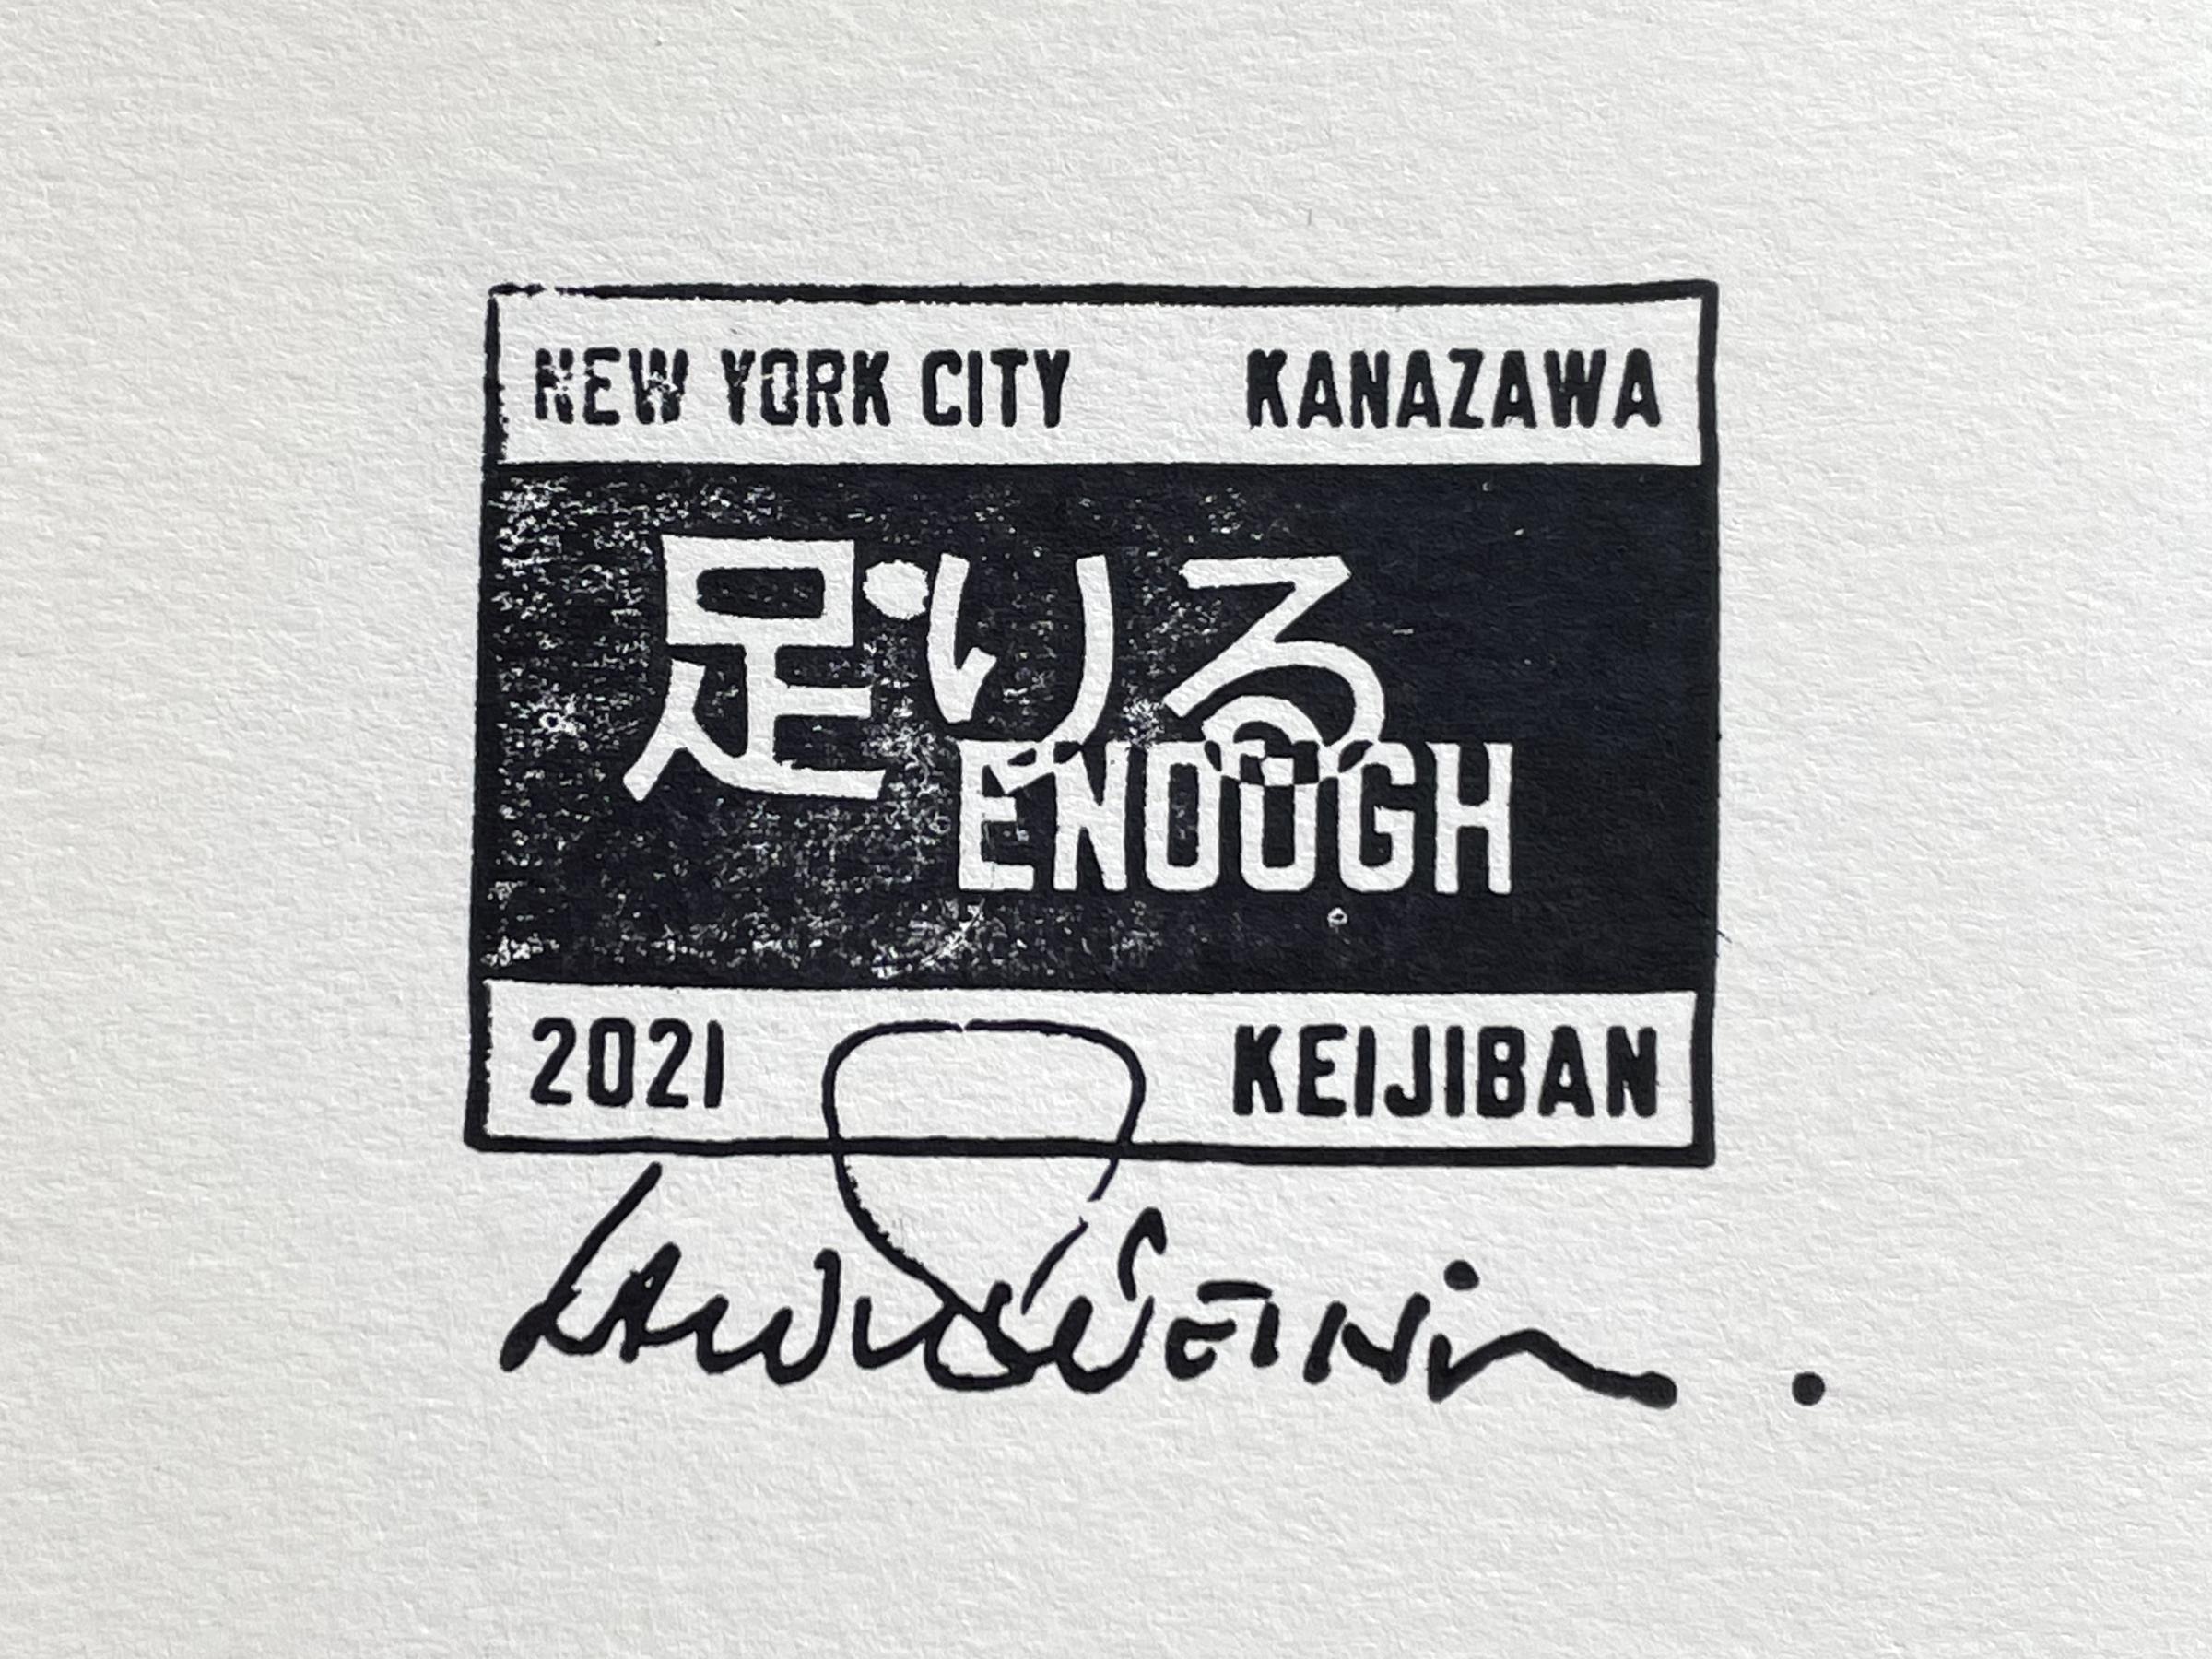 ENOUGH - Lawrence Weiner